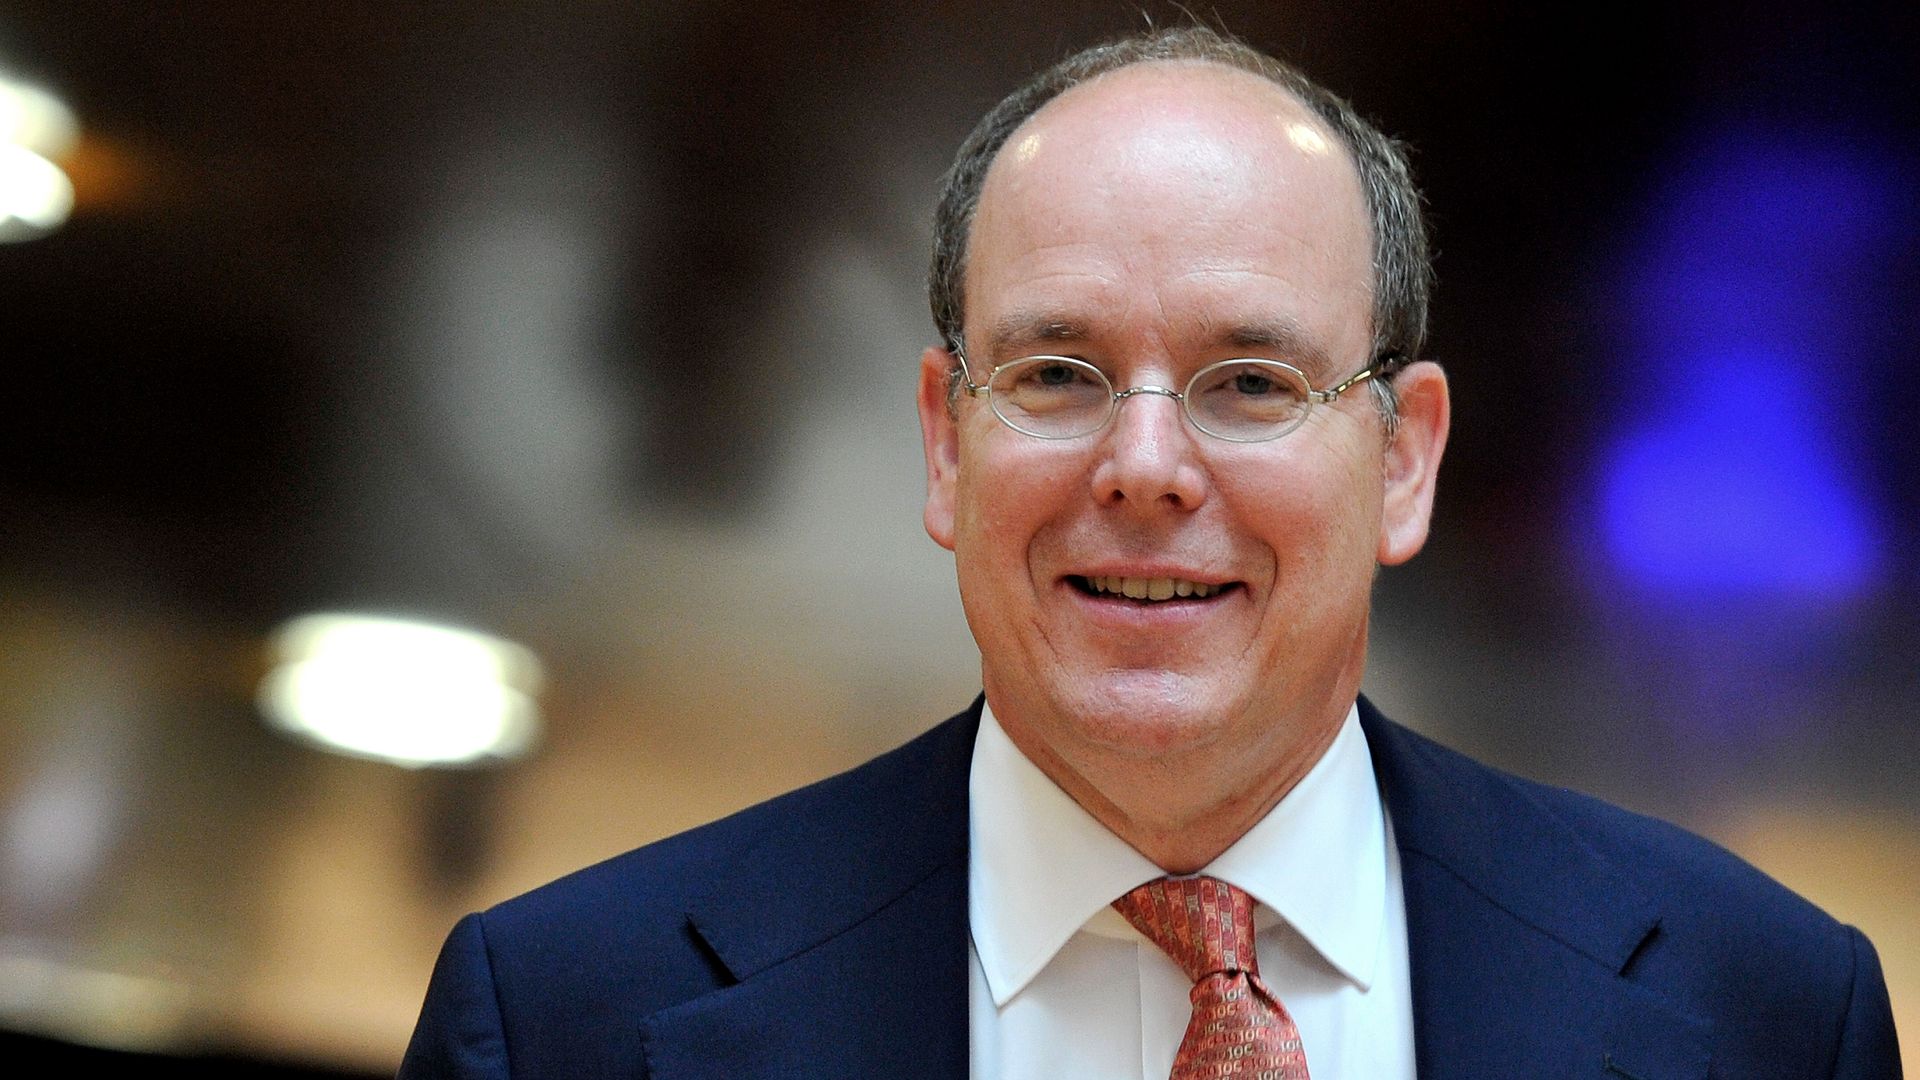 12-mind-blowing-facts-about-prince-albert-ii